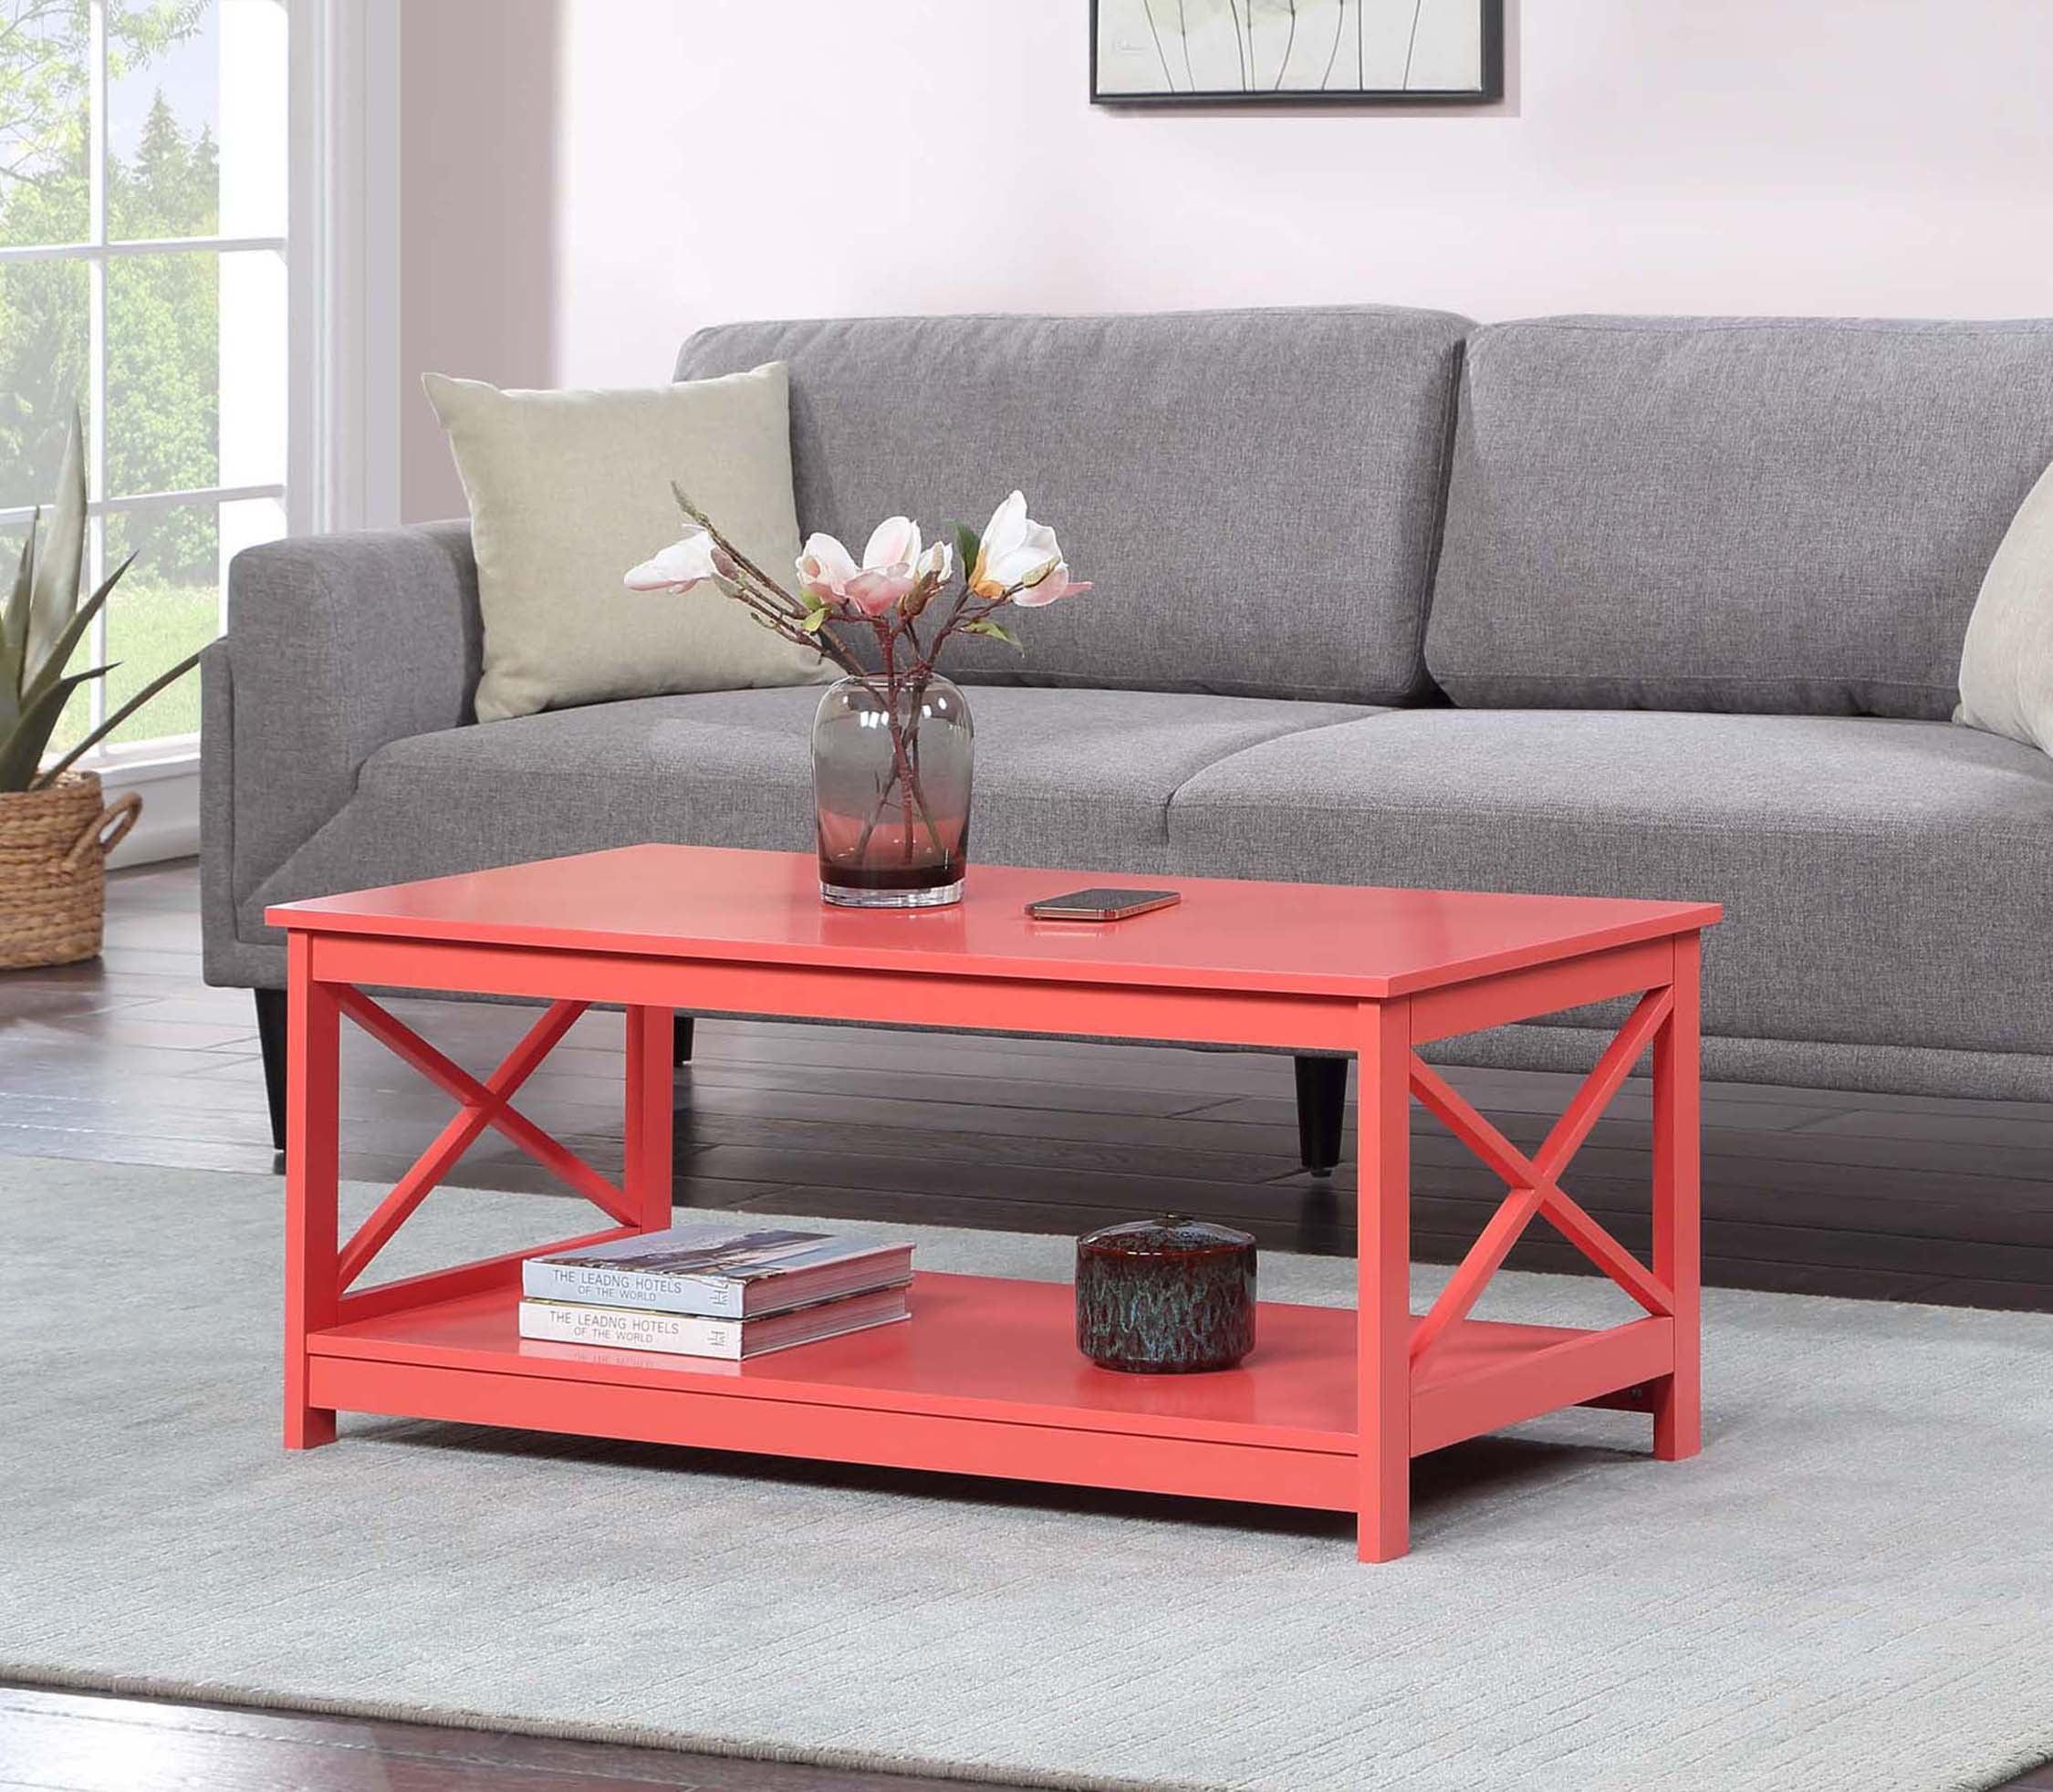 Coral Coastal Chic 40" Wood Coffee Table with Shelf